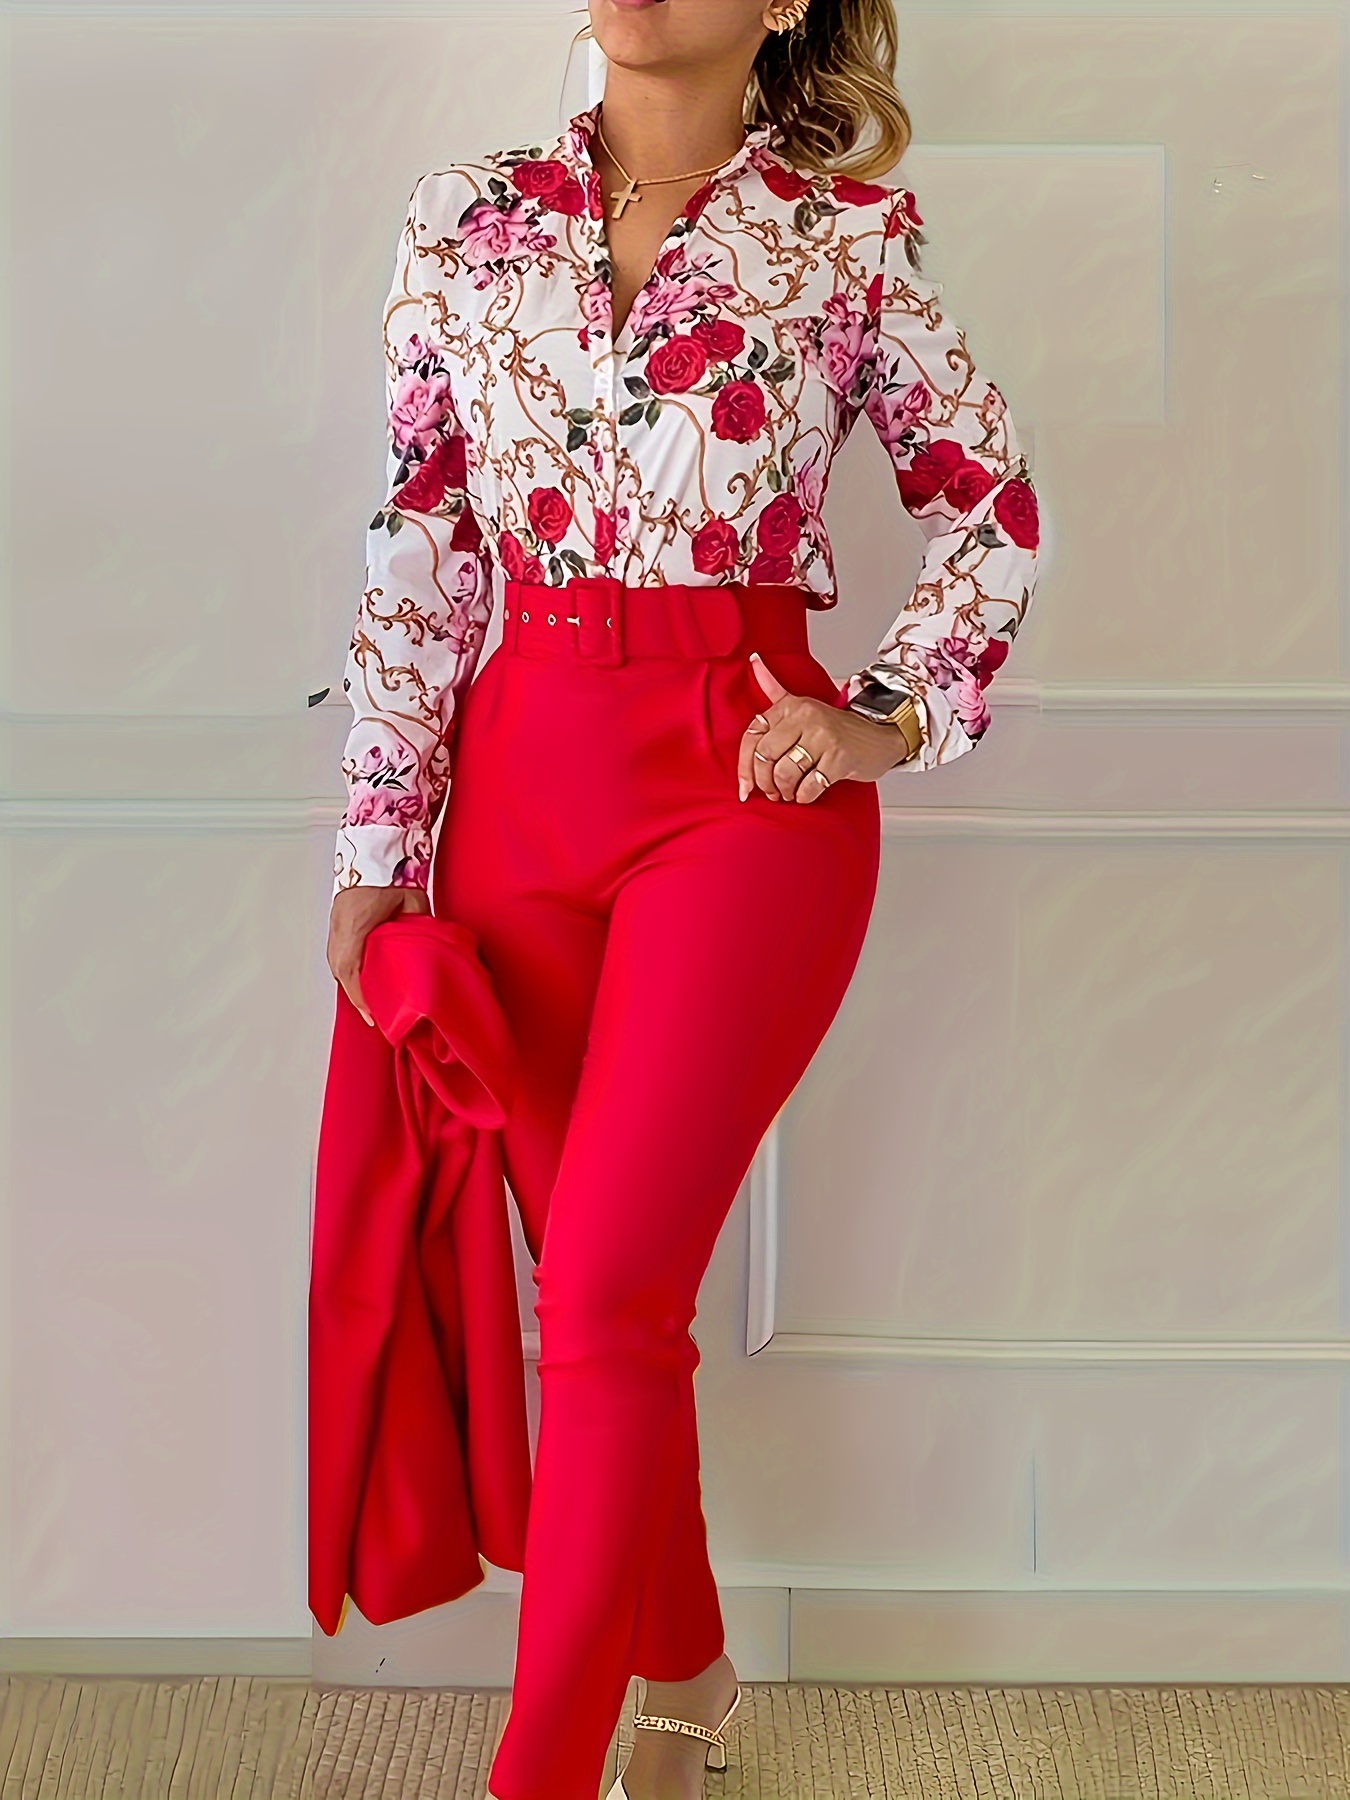 High Quality Piece Blouse Shirt Sets Women Outfit Terno Two Wide High Mid  Sleeve Leg For And Print Pants K&wm Formal Pant Plus Floral Elgant Falle